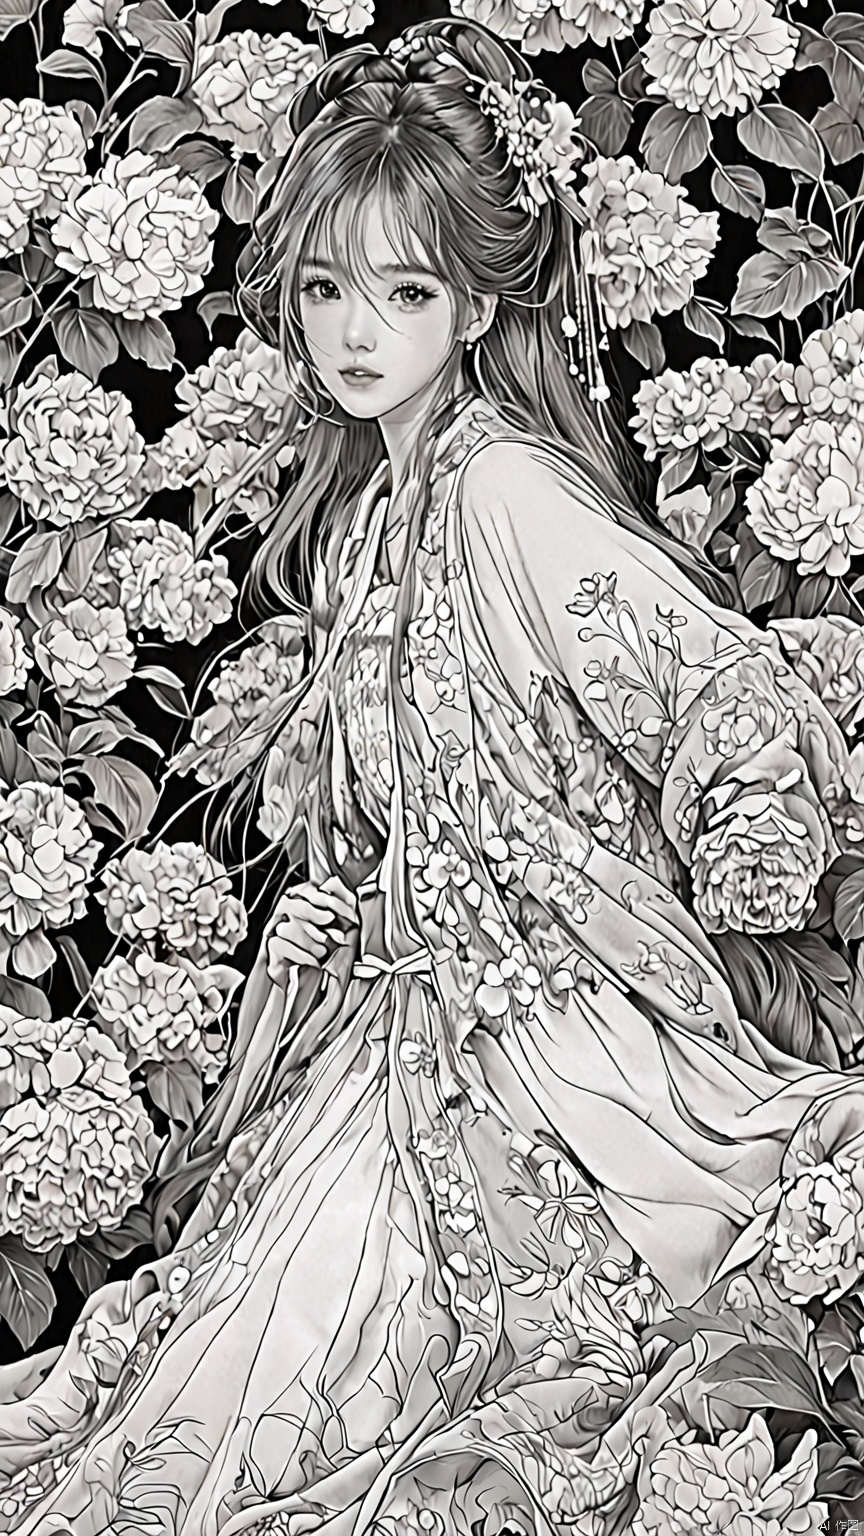 A doll wearing a dress surrounded by flowers and flowers, girl in flowers, extremely fine ink line art, detailed manga style, line art coloring page, black and white coloring, manga style, coloring page, girl made of flowers, complex caricature drawing, exquisite line art, detailed line art, ink caricature drawing, manga illustration, covered with flowers